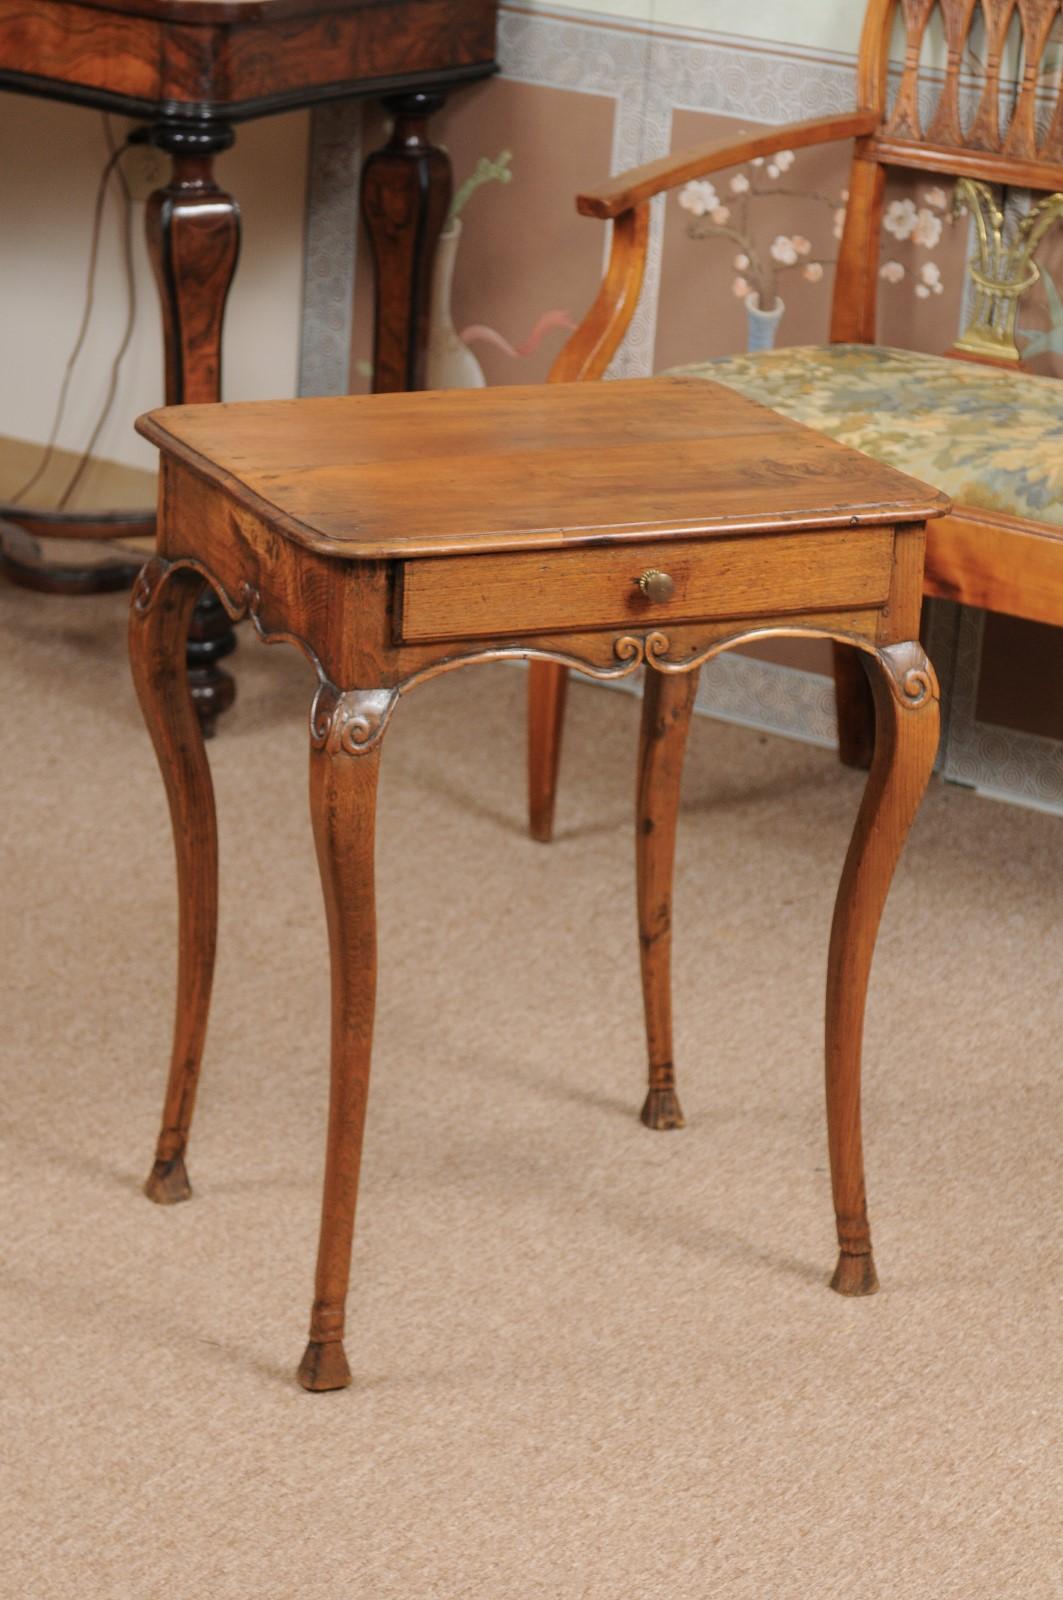 The French Louis XV oak and fruitwood side table with 1 drawer, carved shaped apron, cabriole legs and hoofed feet.